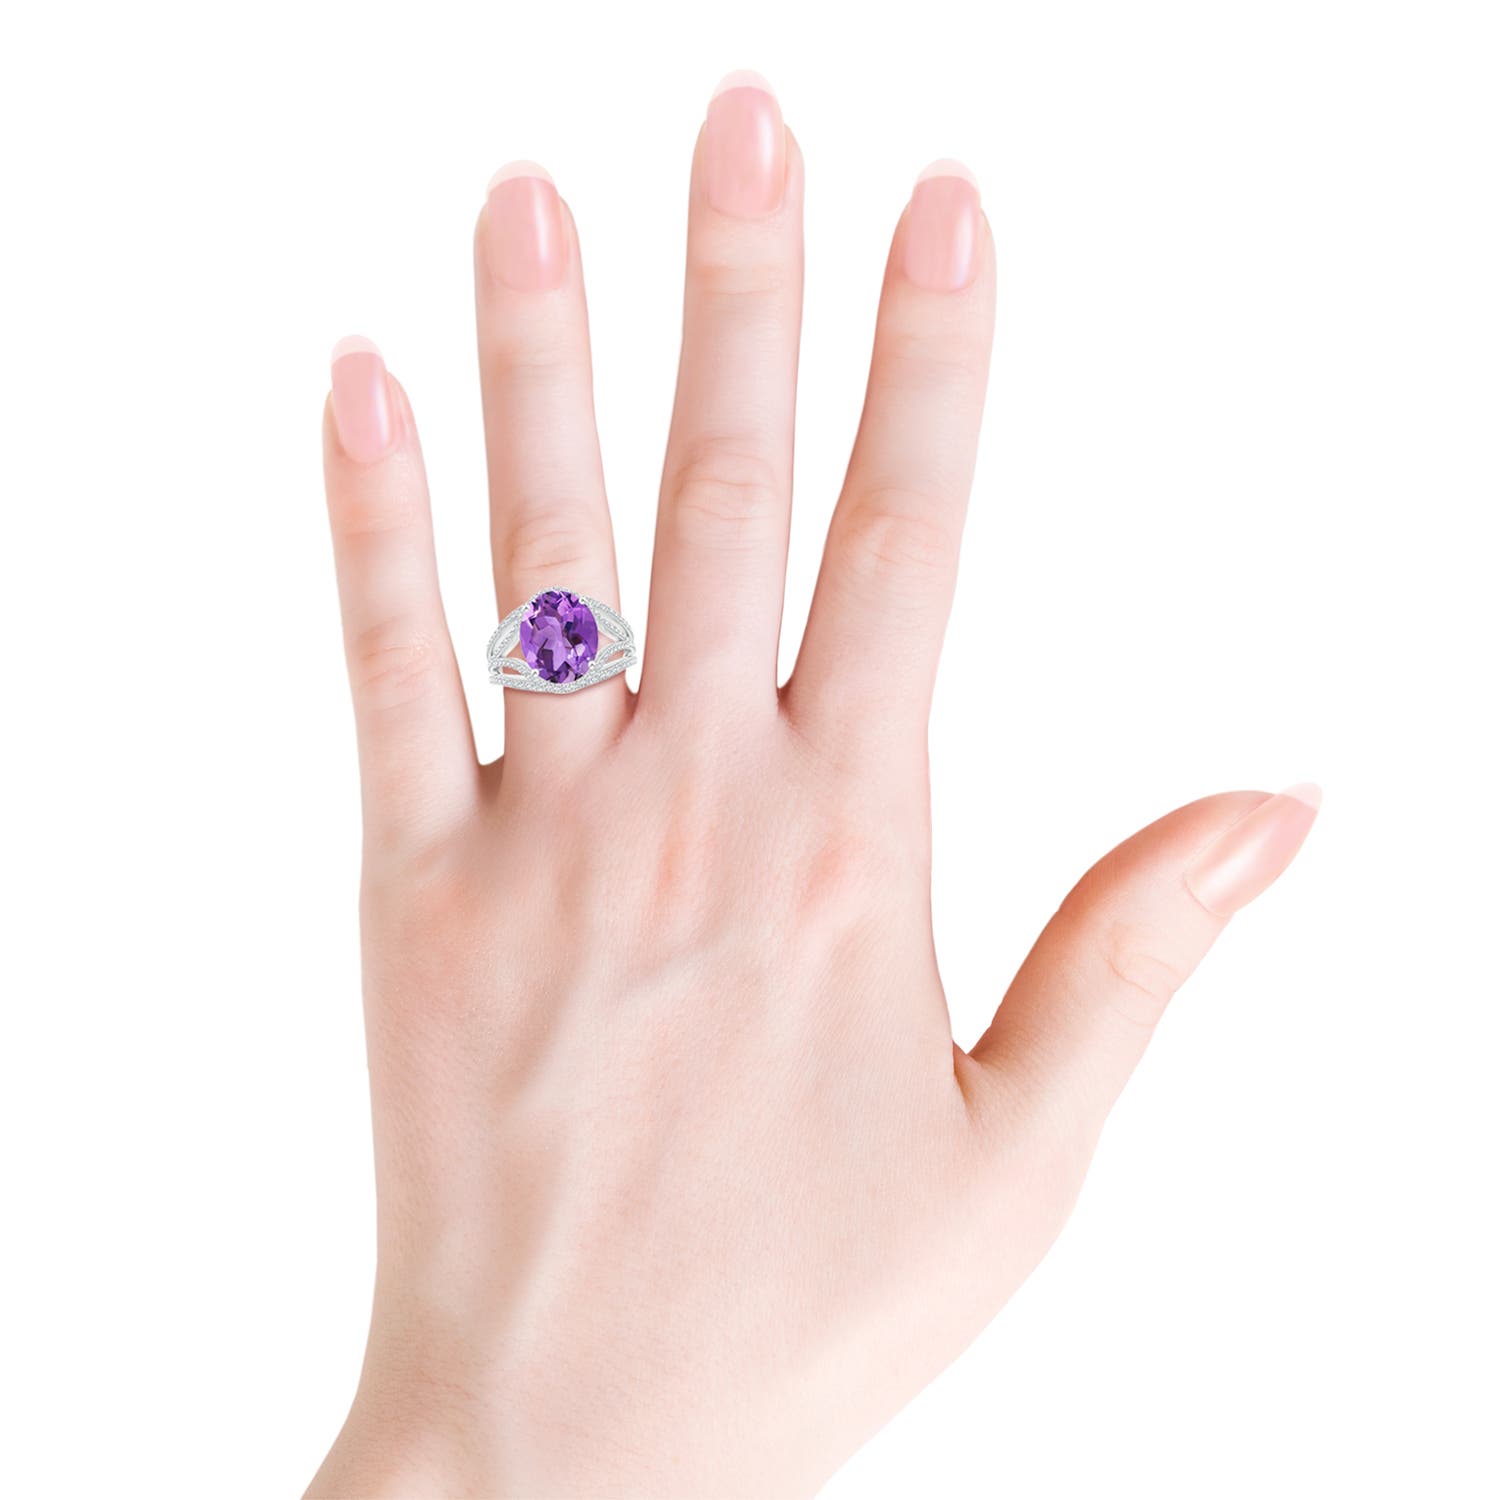 AA - Amethyst / 4.94 CT / 14 KT White Gold